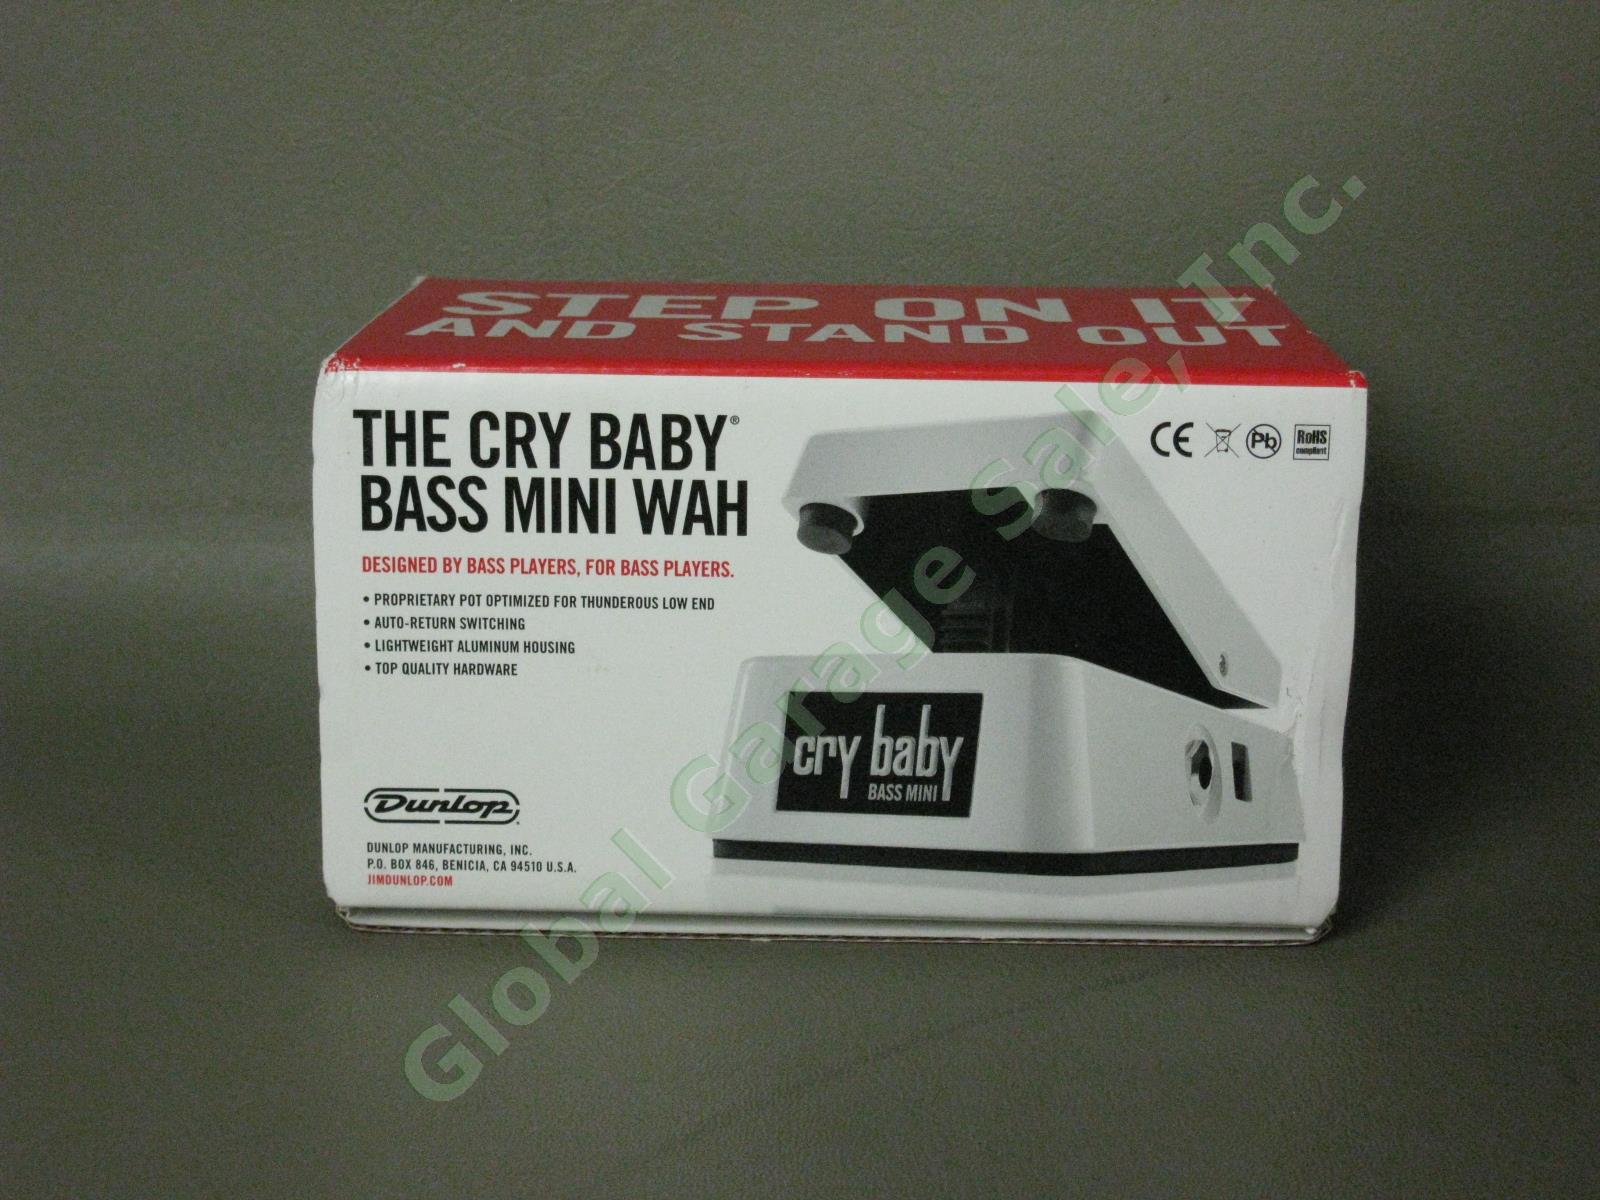 New In Box Dunlop Cry Baby Bass Mini Wah Guitar Effects Pedal CBM105Q White 7